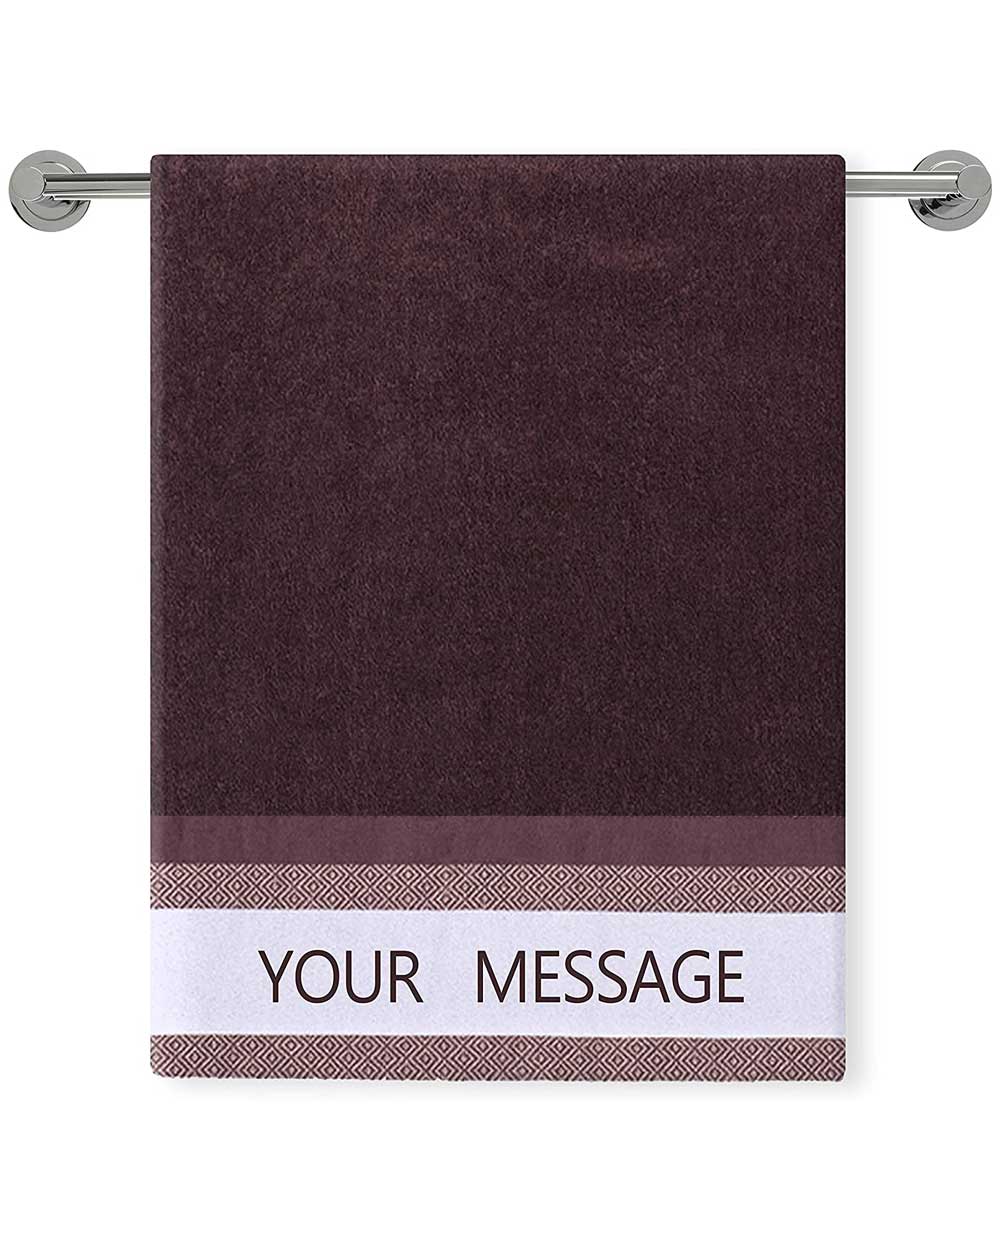 Conference Brown Bath Towel (SIZE 27"X 53")